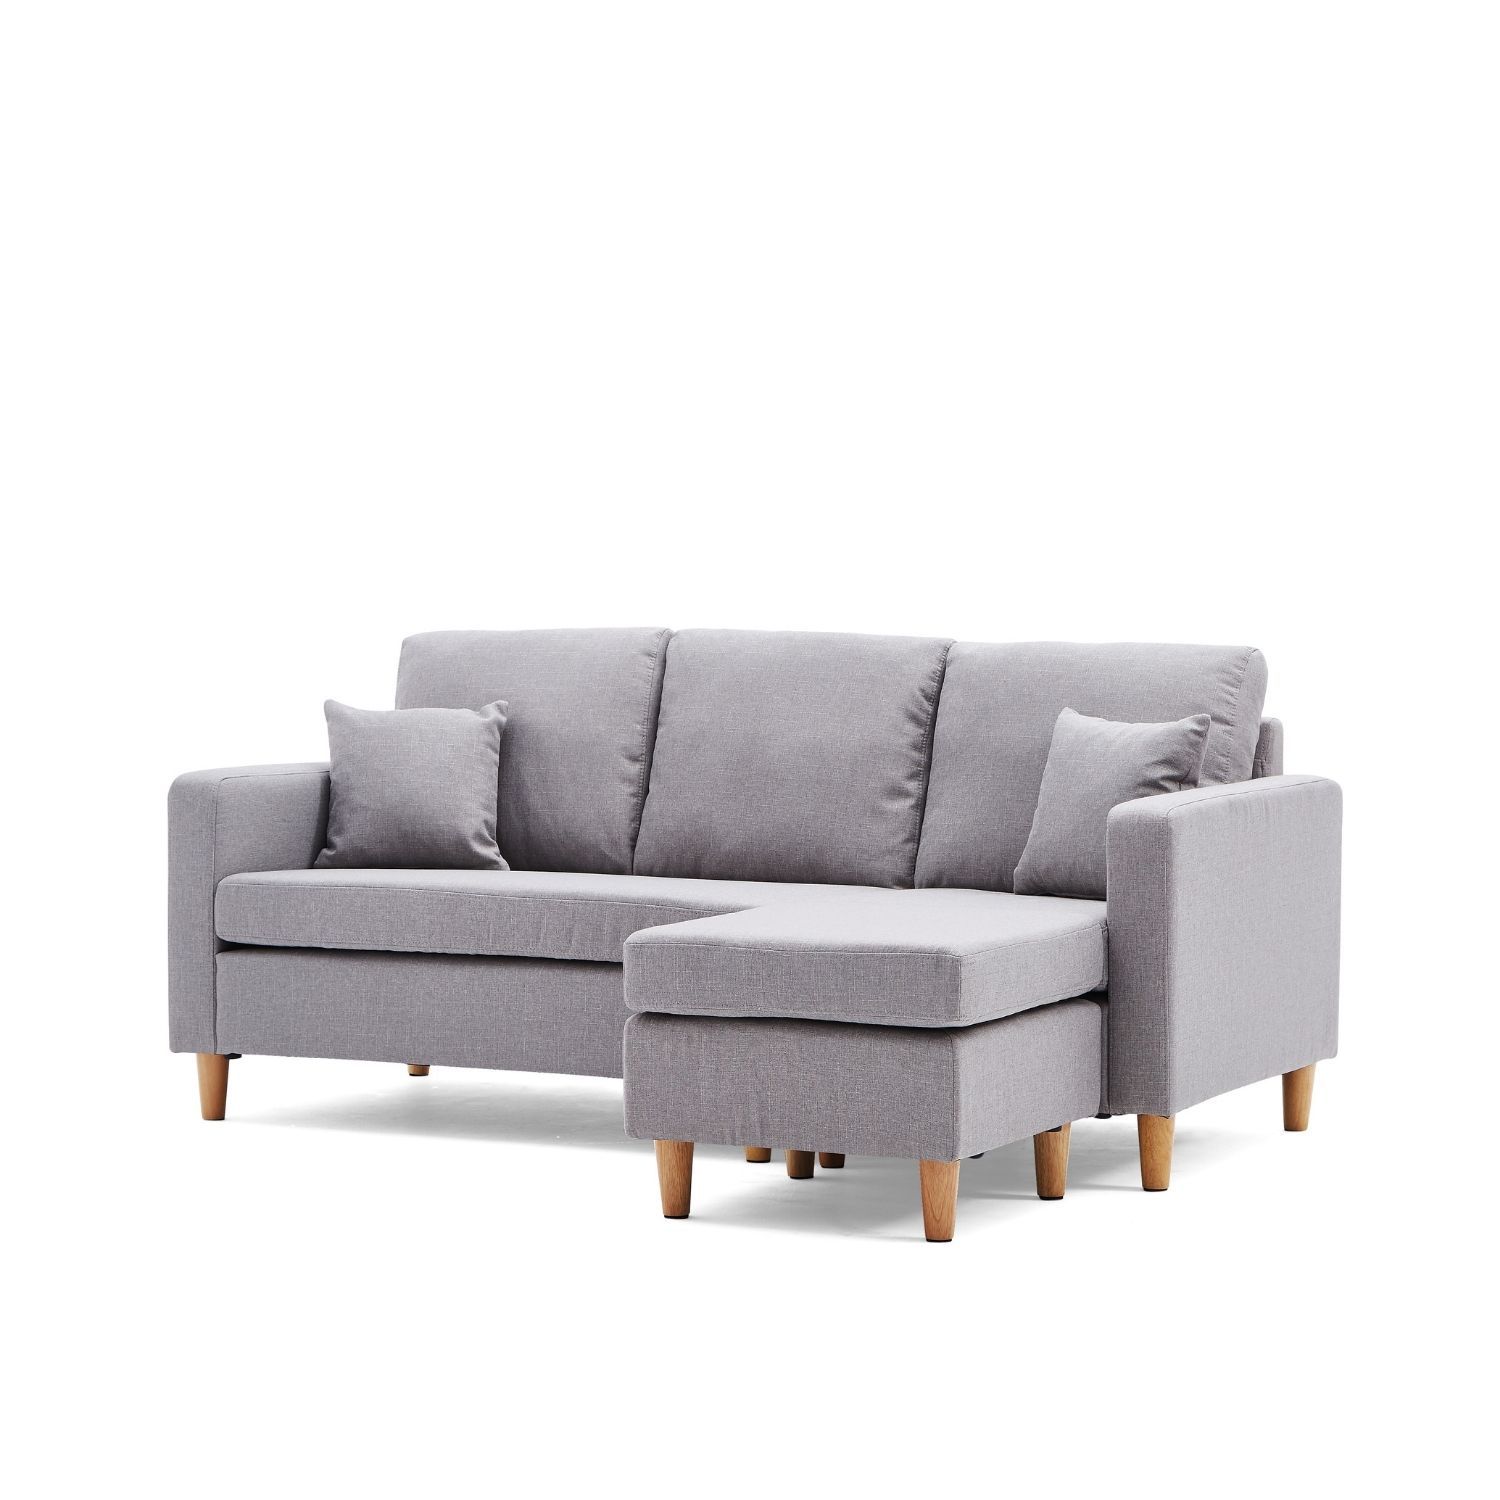 Valolam Compact Sectional Sofa Valyou Furniture 